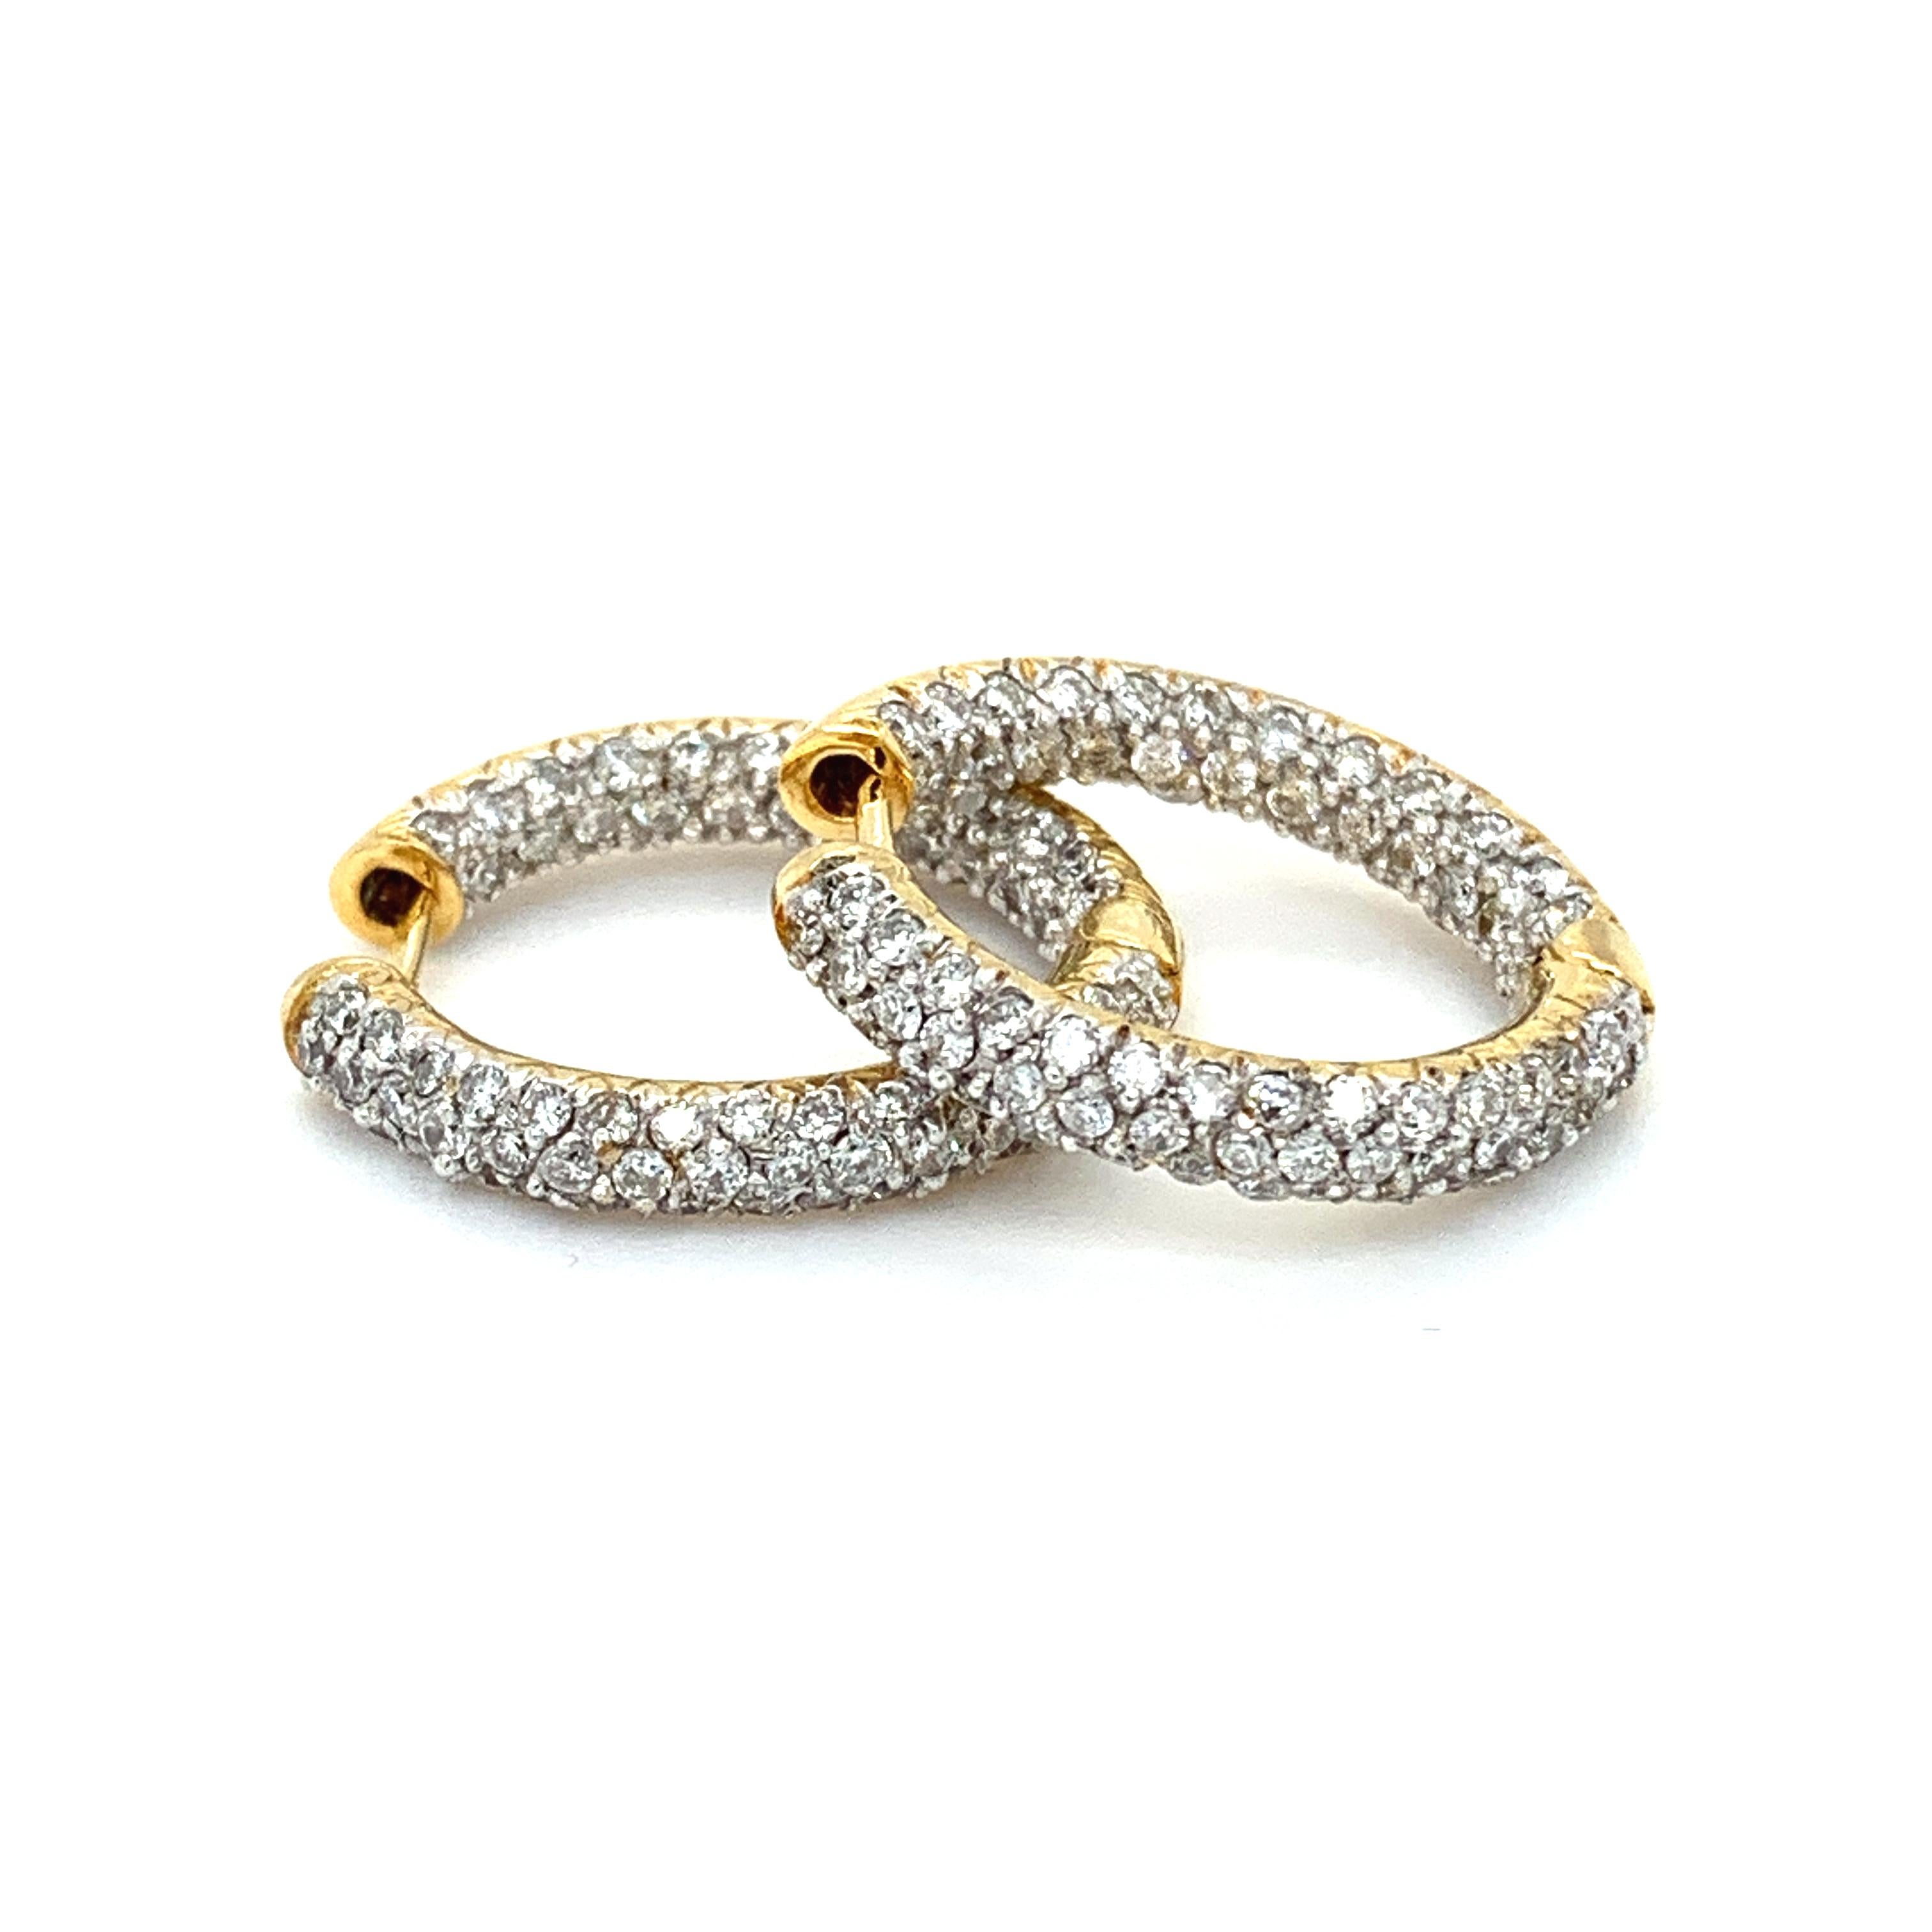 Diamond art deco hoops huggies earrings 18k yellow gold In New Condition For Sale In London, GB